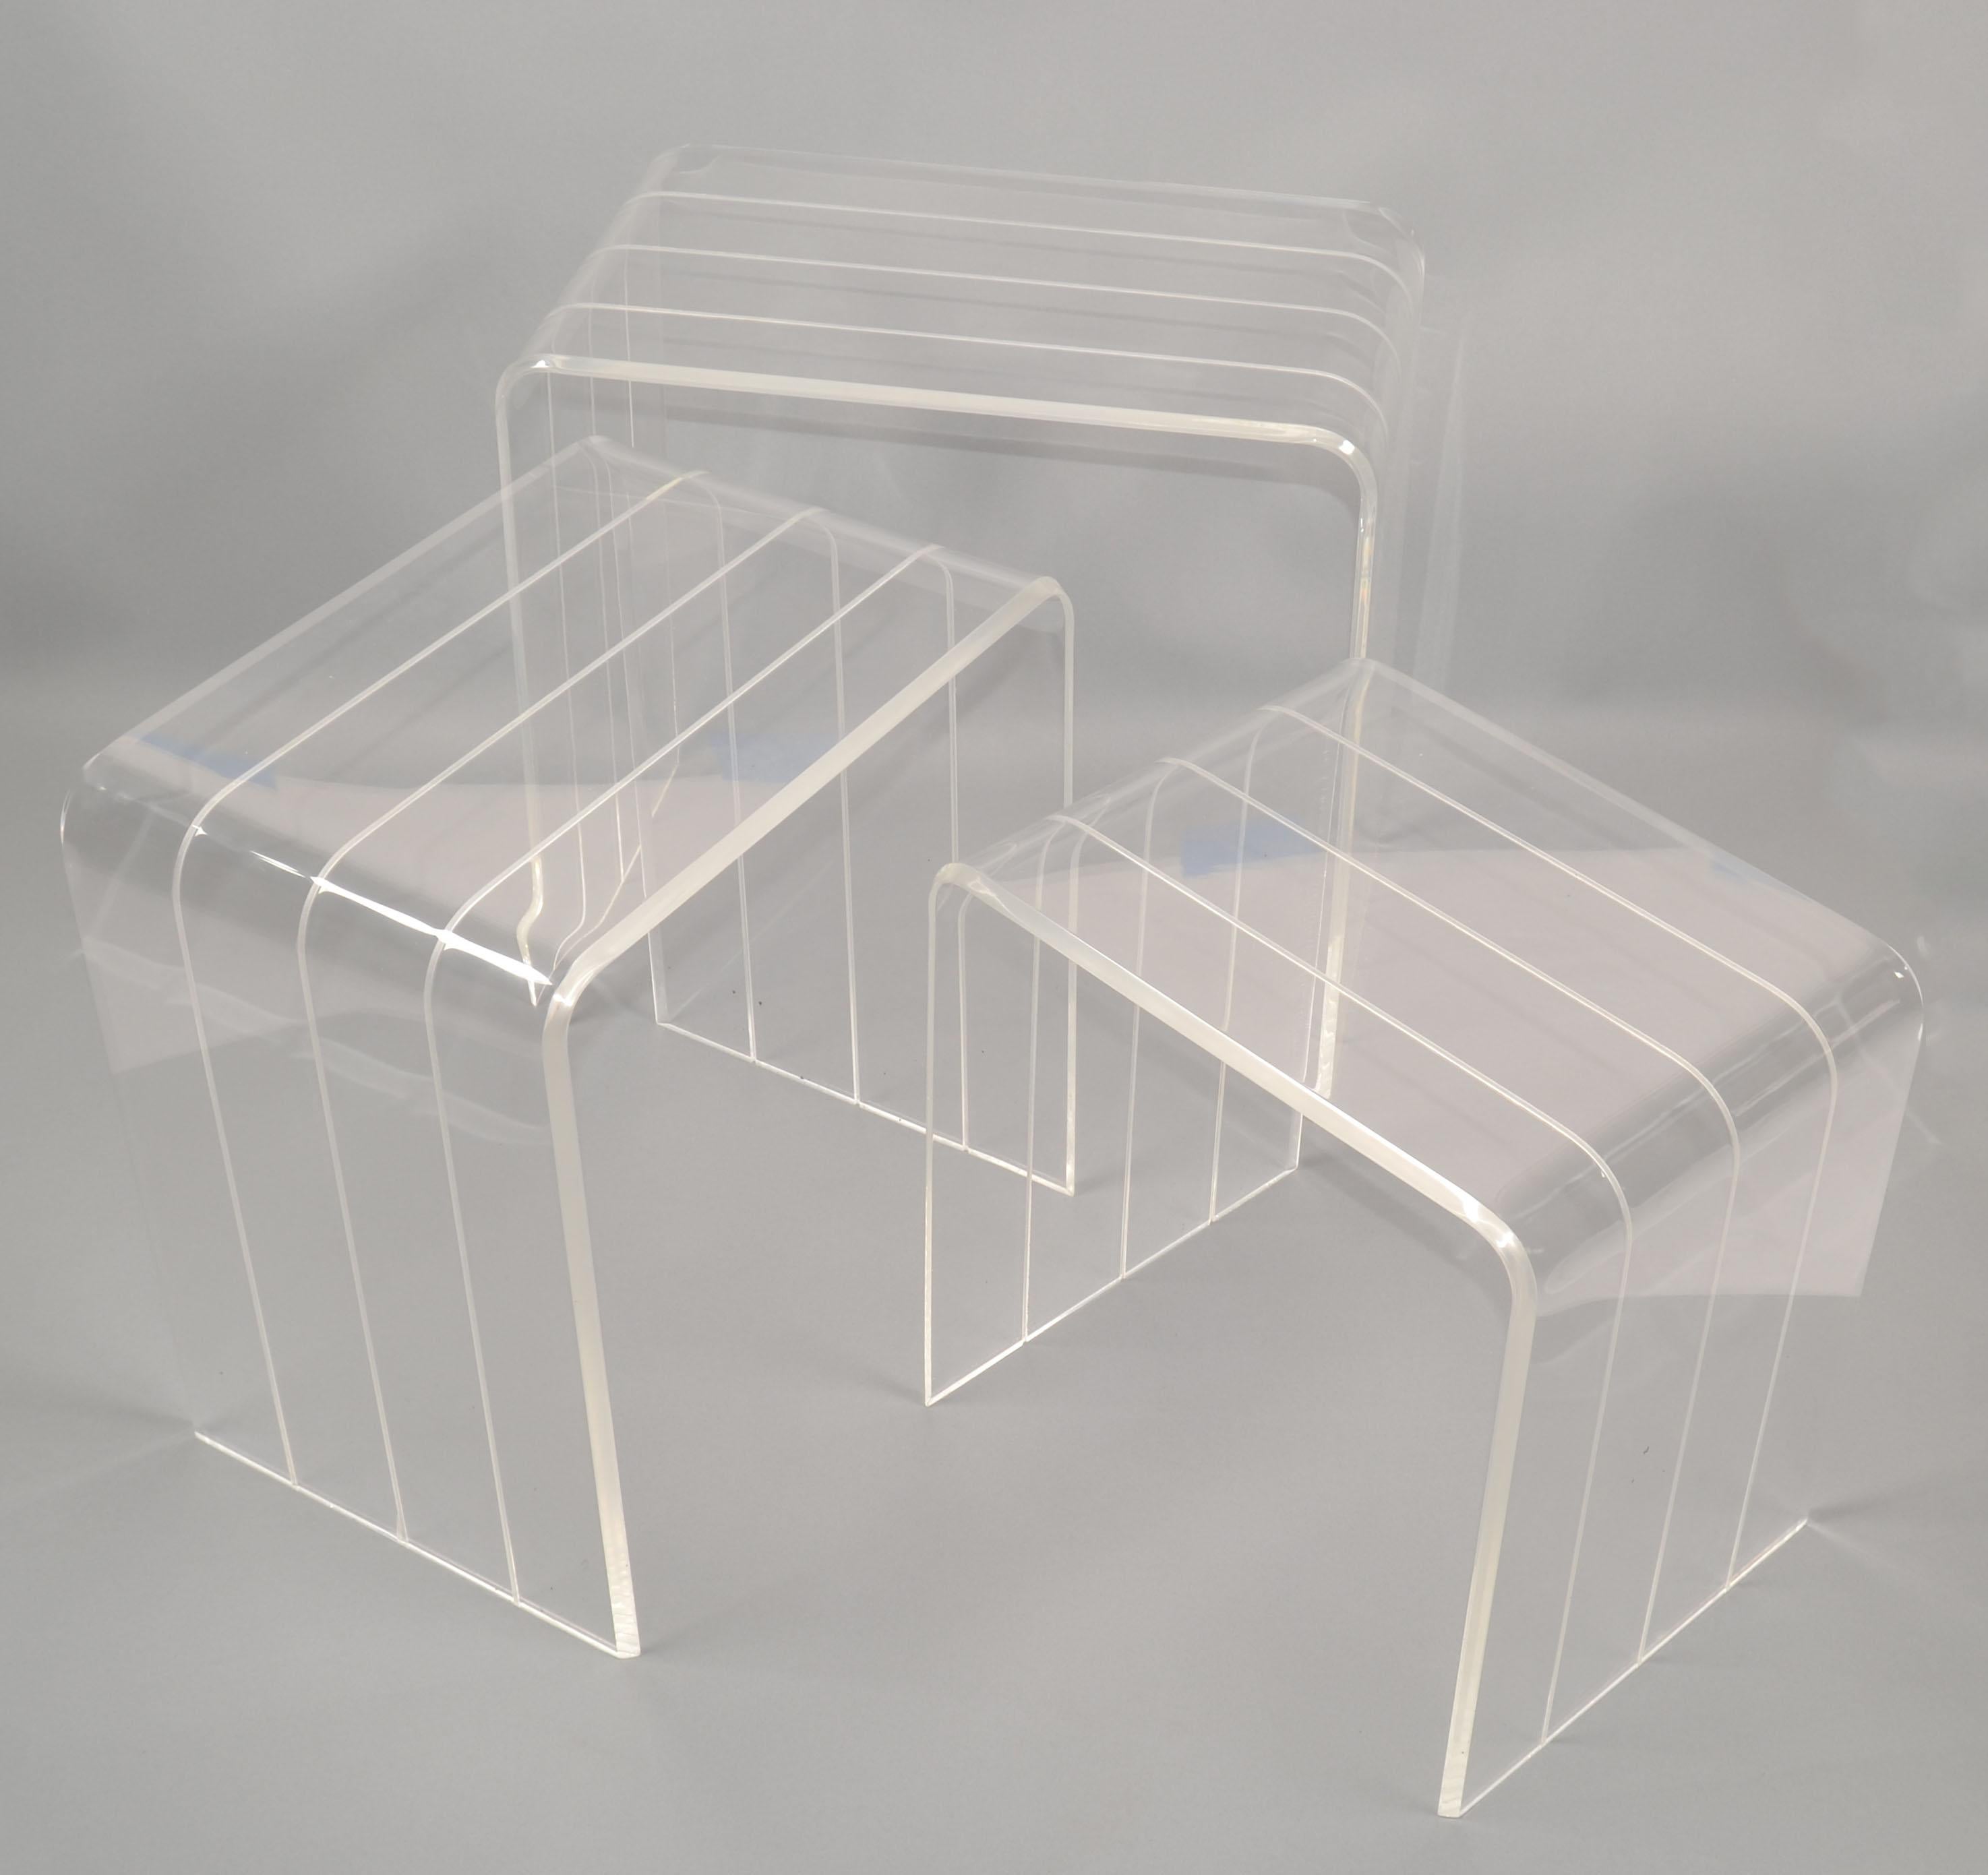 Set 3 Italian Etched Lucite Waterfall Nesting Tables Stacking Tables Stools 1970 For Sale 8